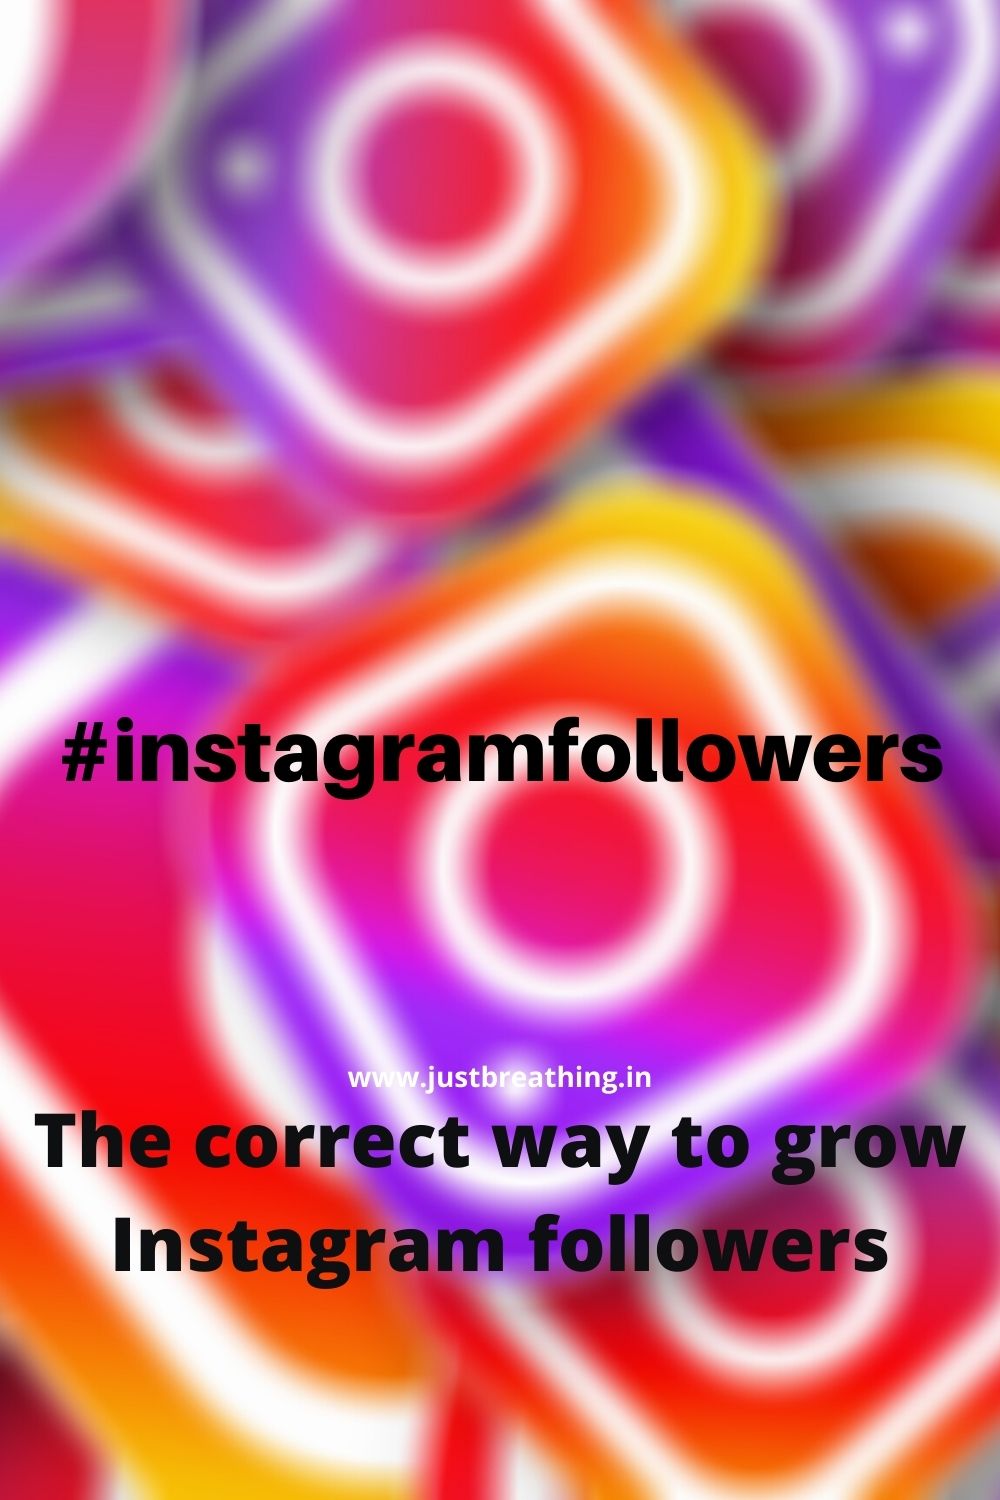 The correct way to grow Instagram followers - #instagramfollowers Hashtags of Instagram followers